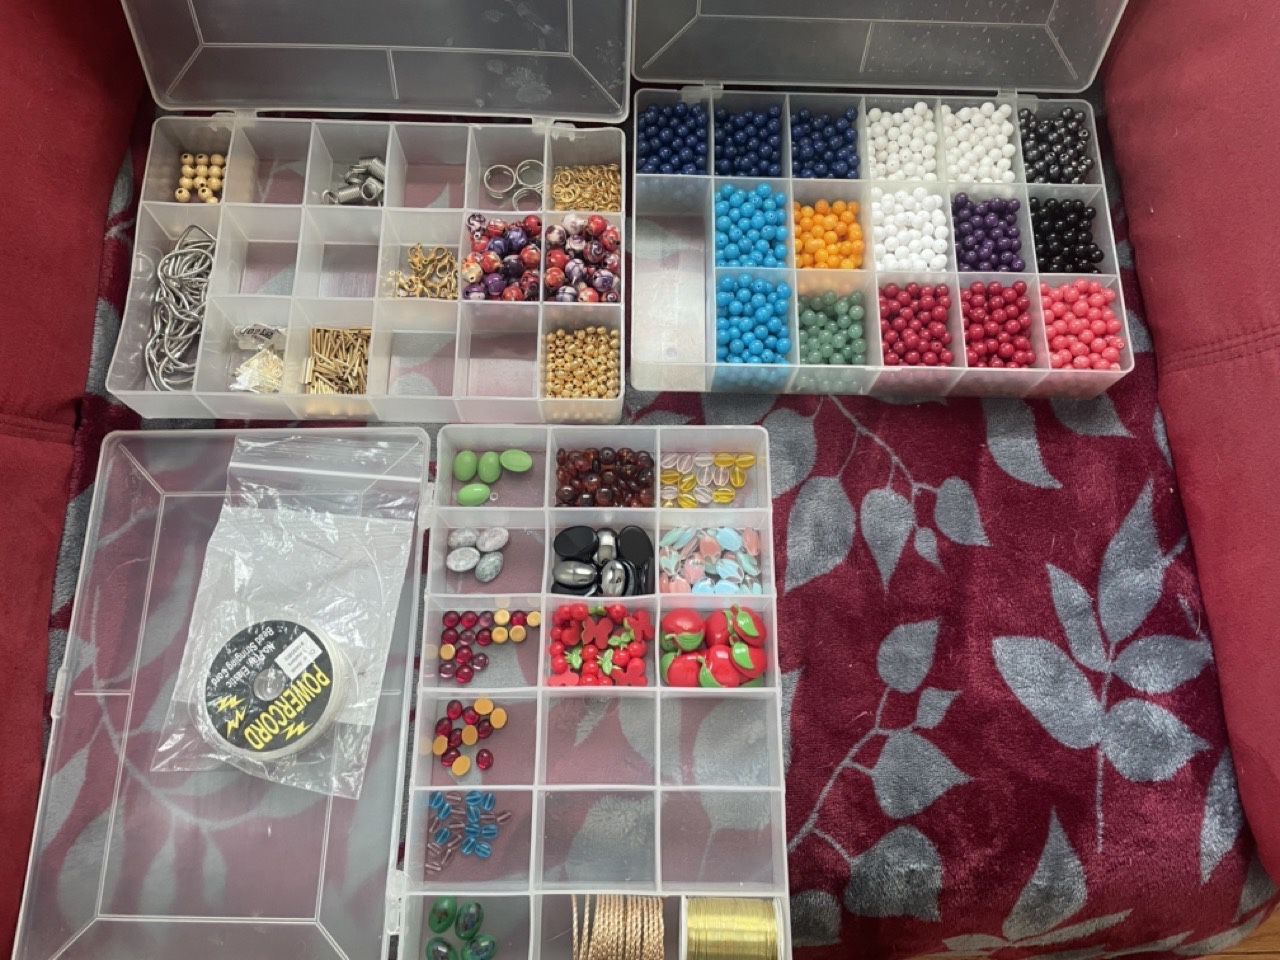 BEADS, BELLS, CABOCHONS, FINDINGS AND JEWELRY MAKING SUPPLIES